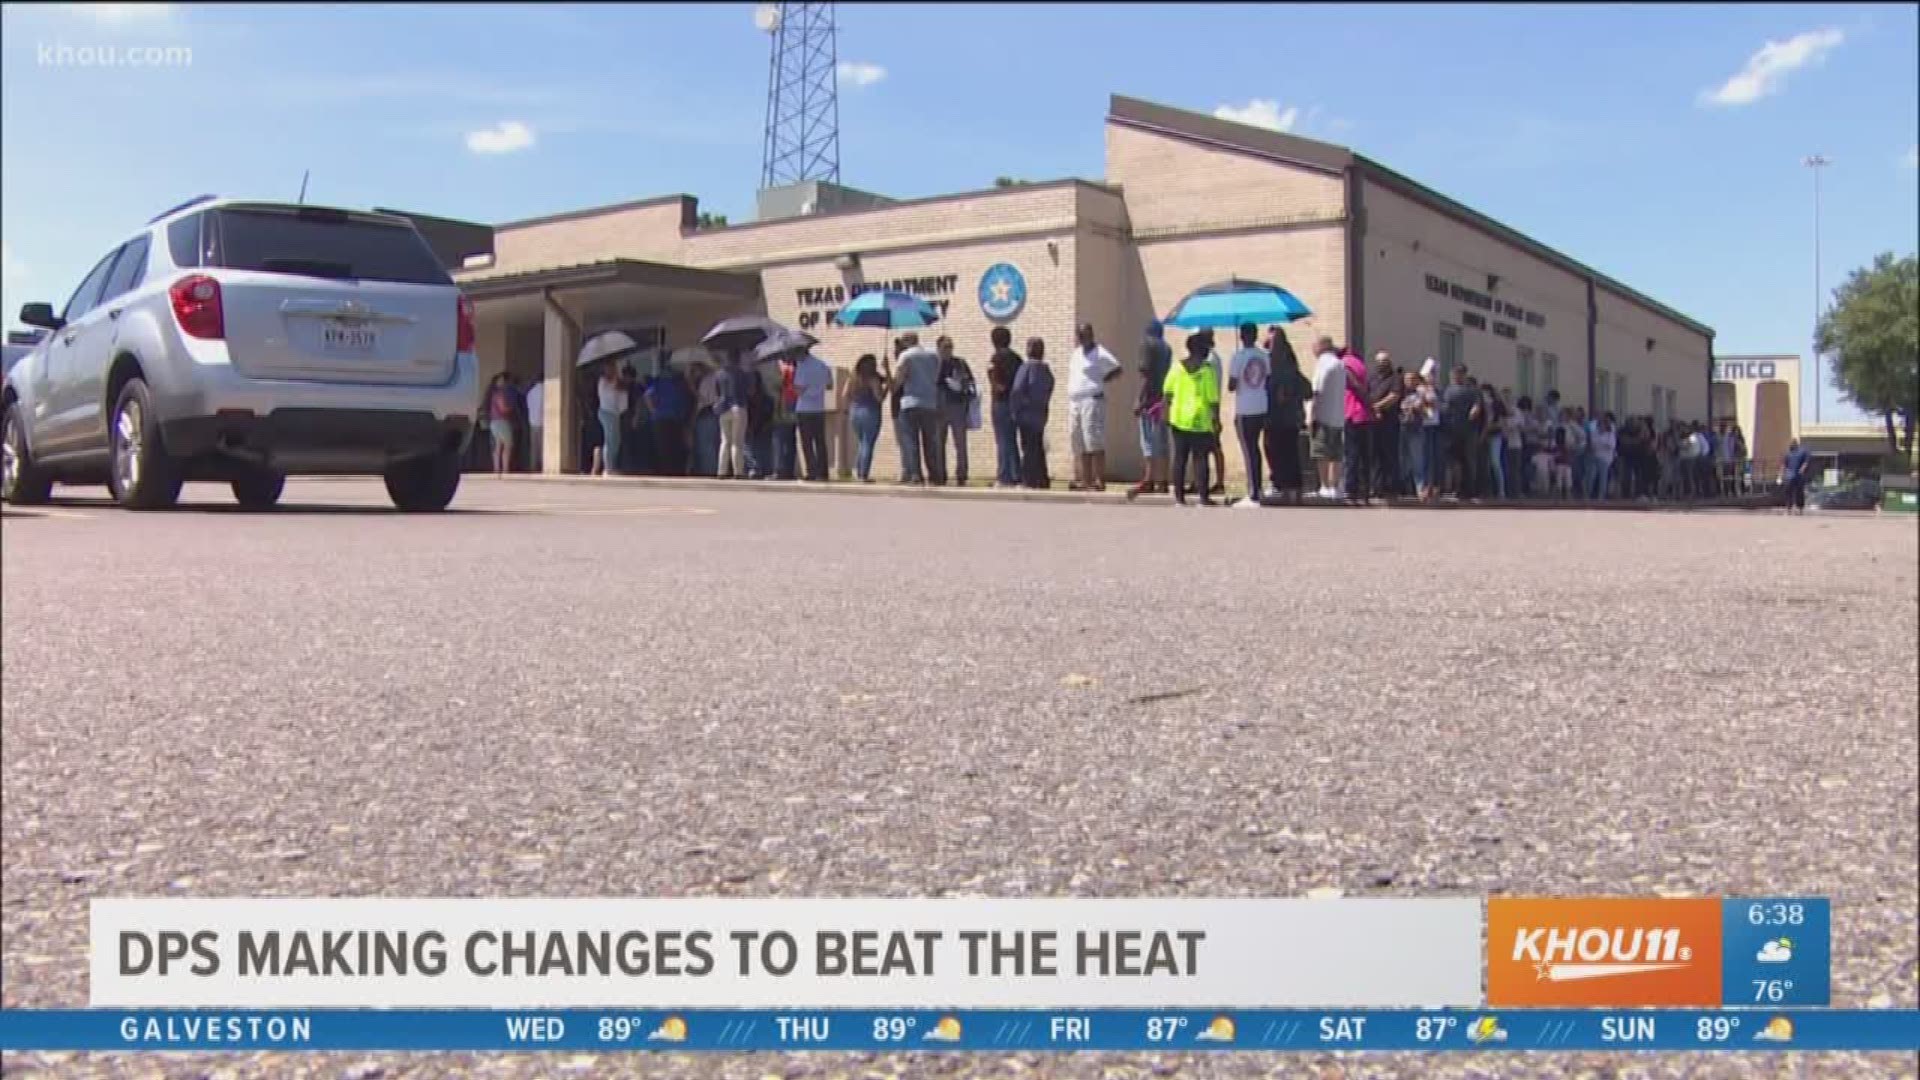 It's tough to spend anytime outside this time of year, and that can make a trip to the DPS, painful. Especially if you're like the folks standing in line outside, under the scorching sun. Now, the Texas Department of Public Safety is worried about people'